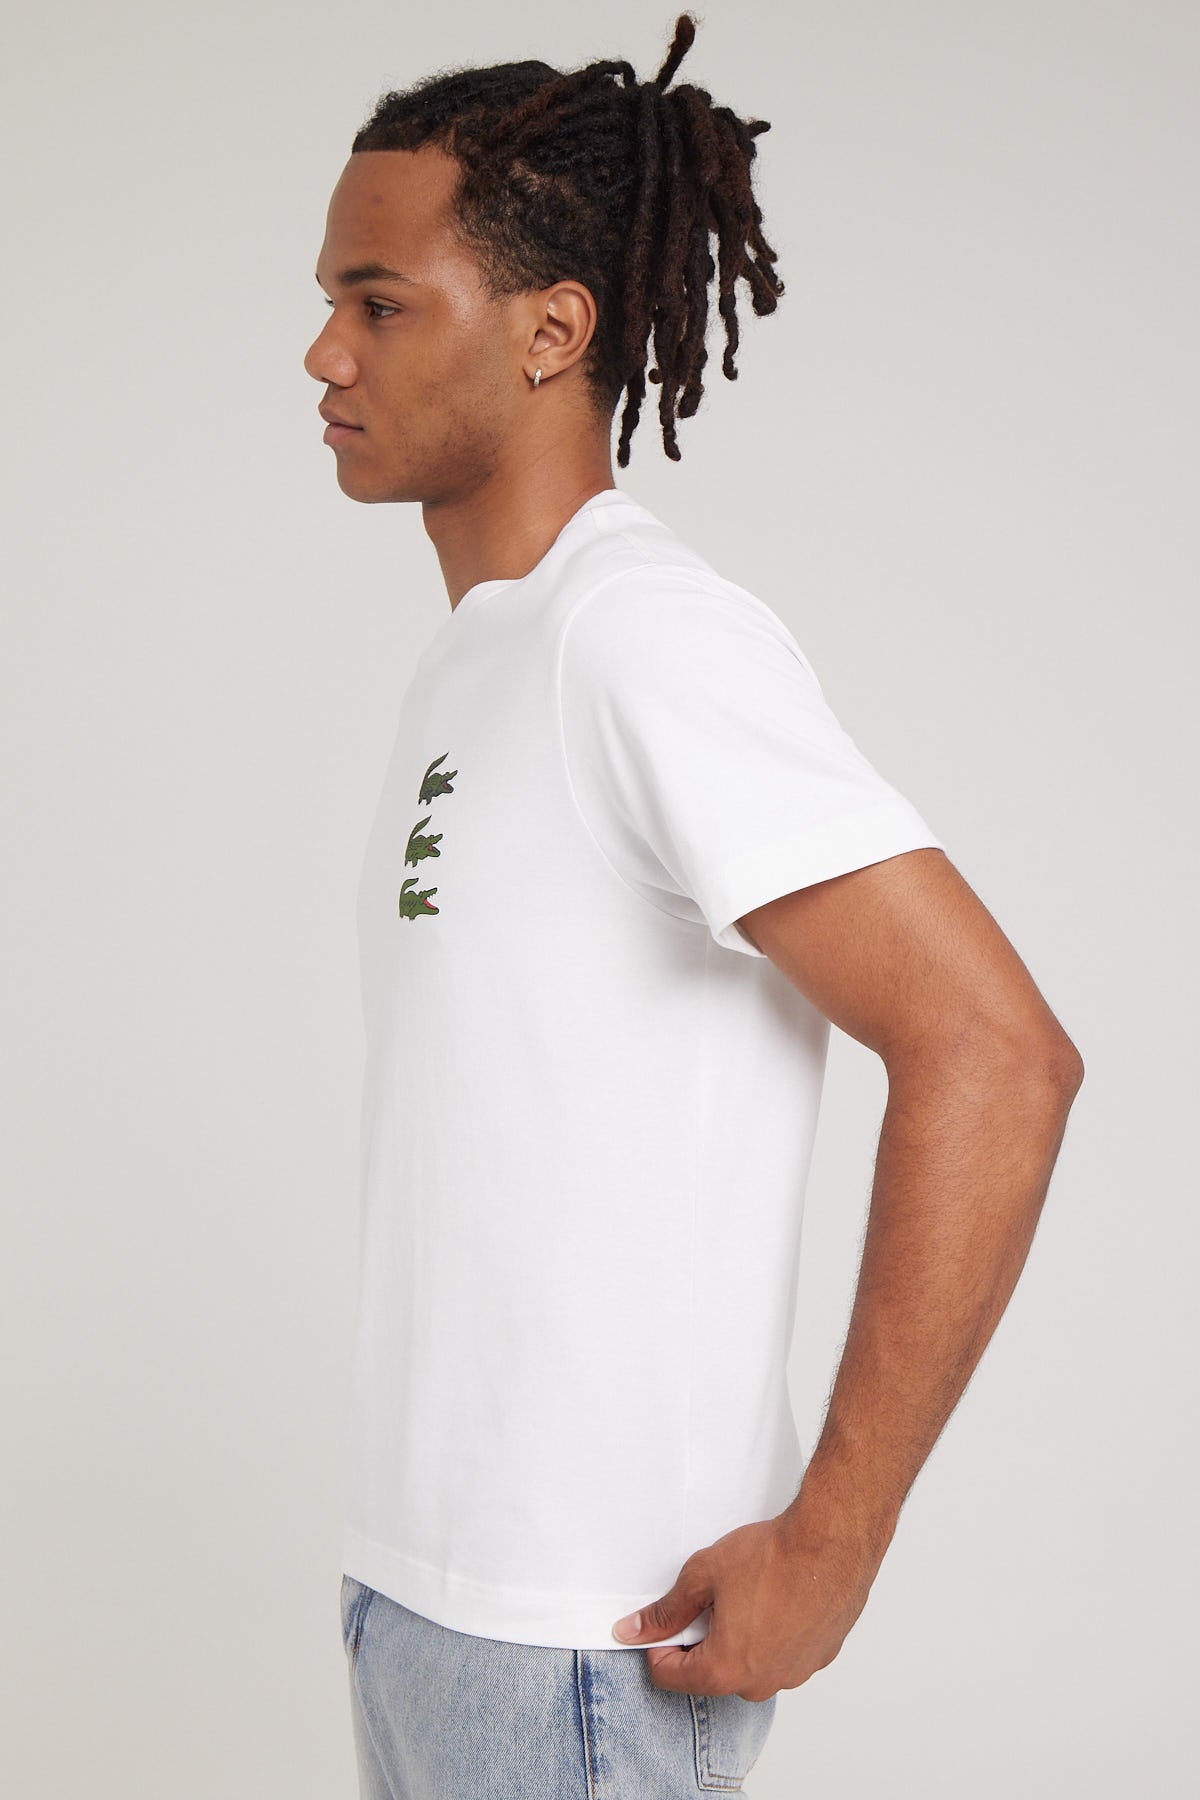 Lacoste Holiday Icons 3 Croc T-Shirt White